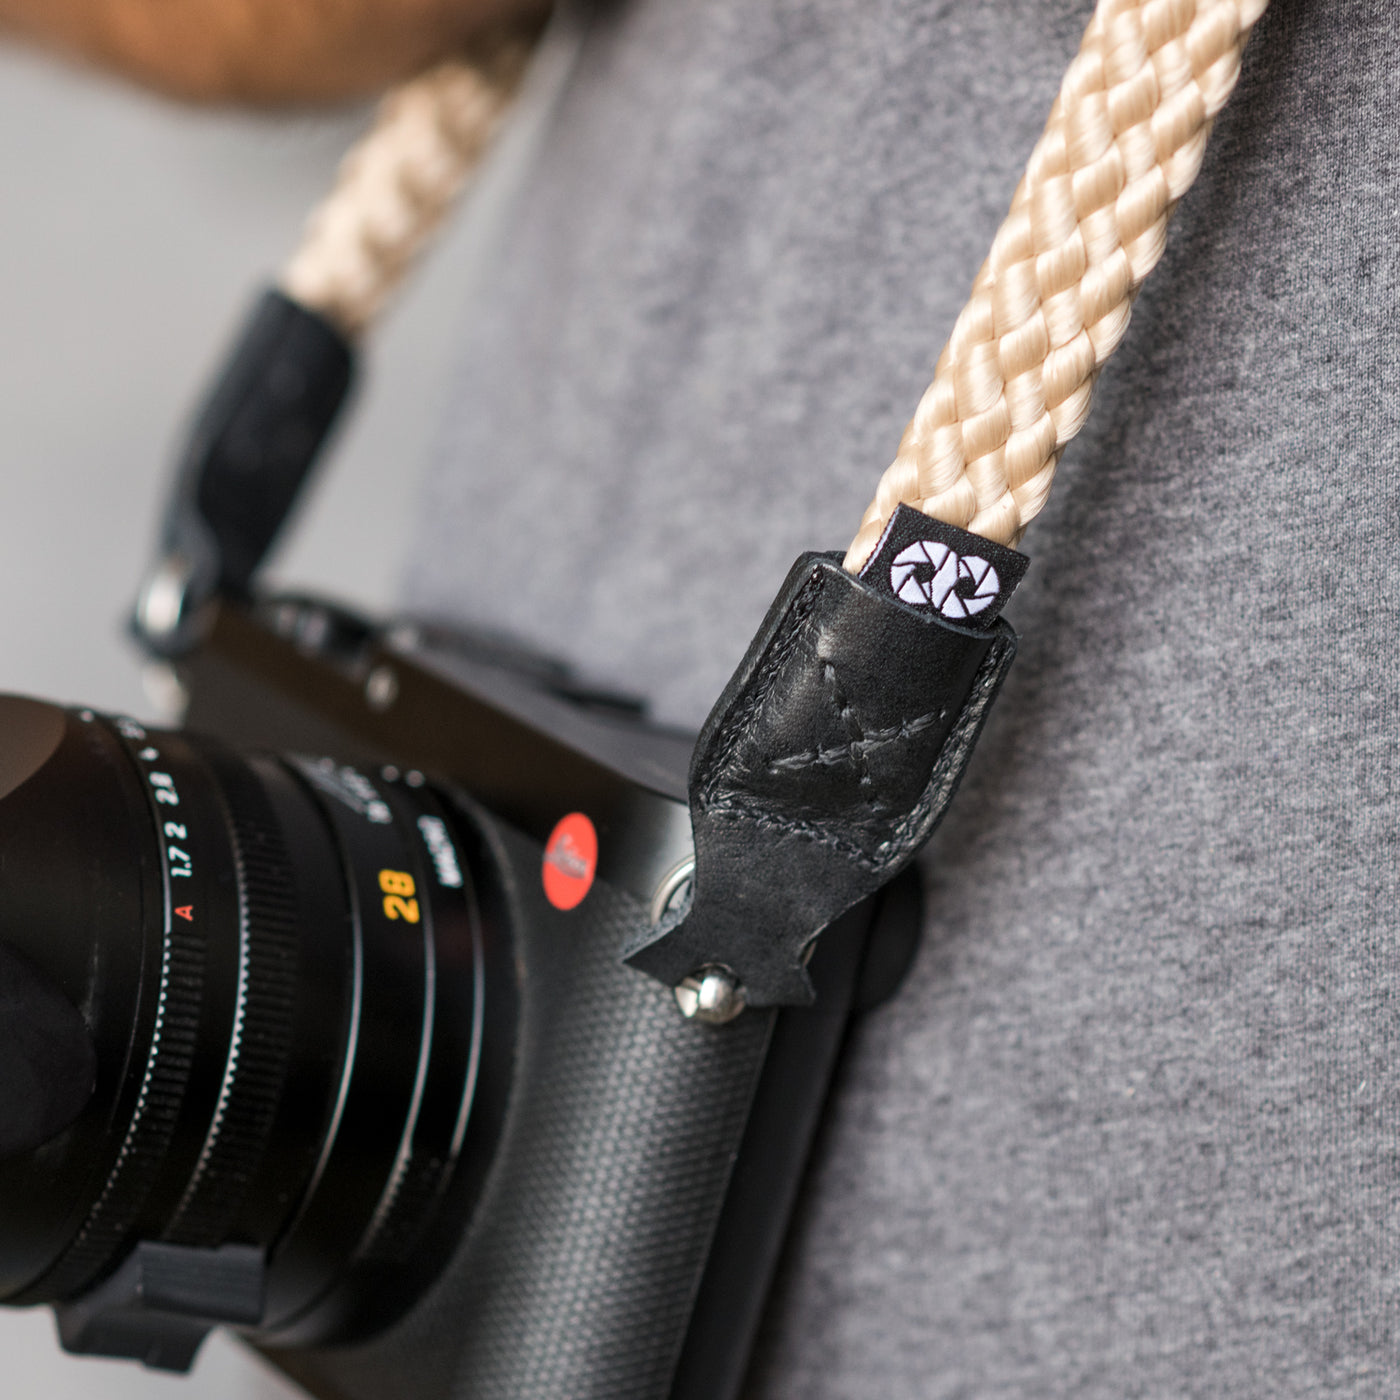 Leica camera on a photographer's hip held with braid camera strap 